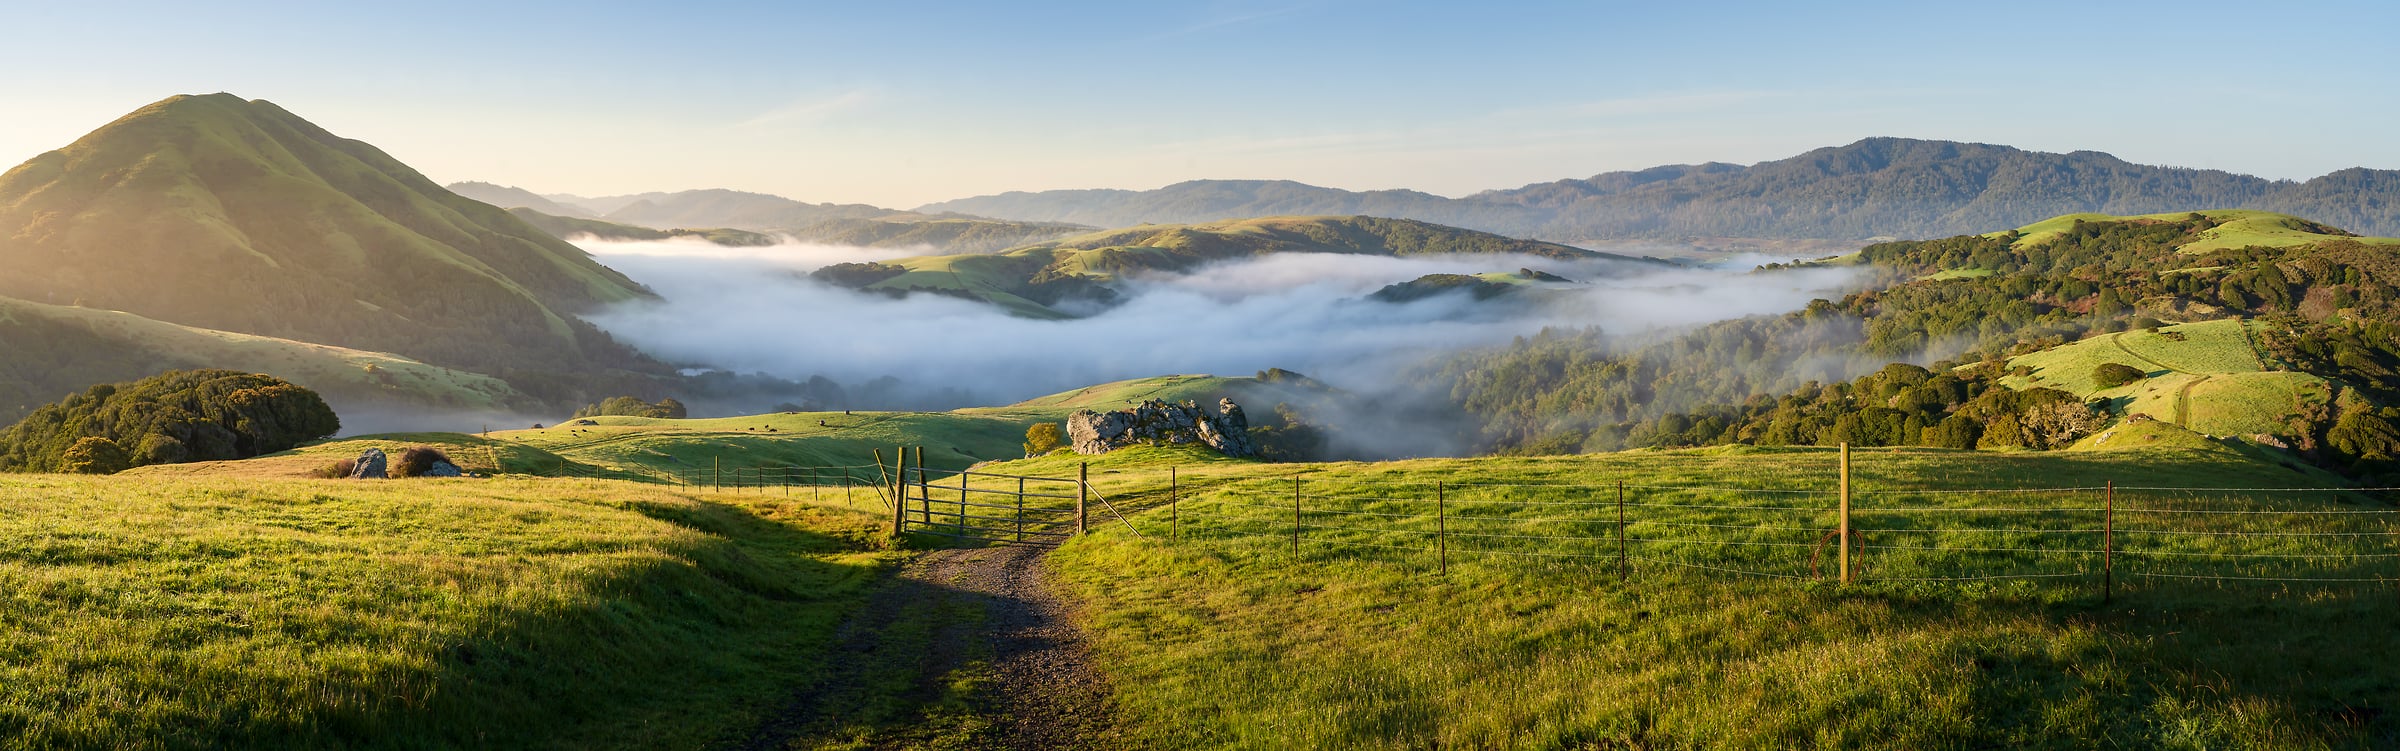 145 megapixels! A very high resolution, large-format VAST photo print of a beautiful, idyllic, happy landscape with farmland, mountains, a valley with clouds, and a blue sky; photograph created by Jeff Lewis in Marin County, California.